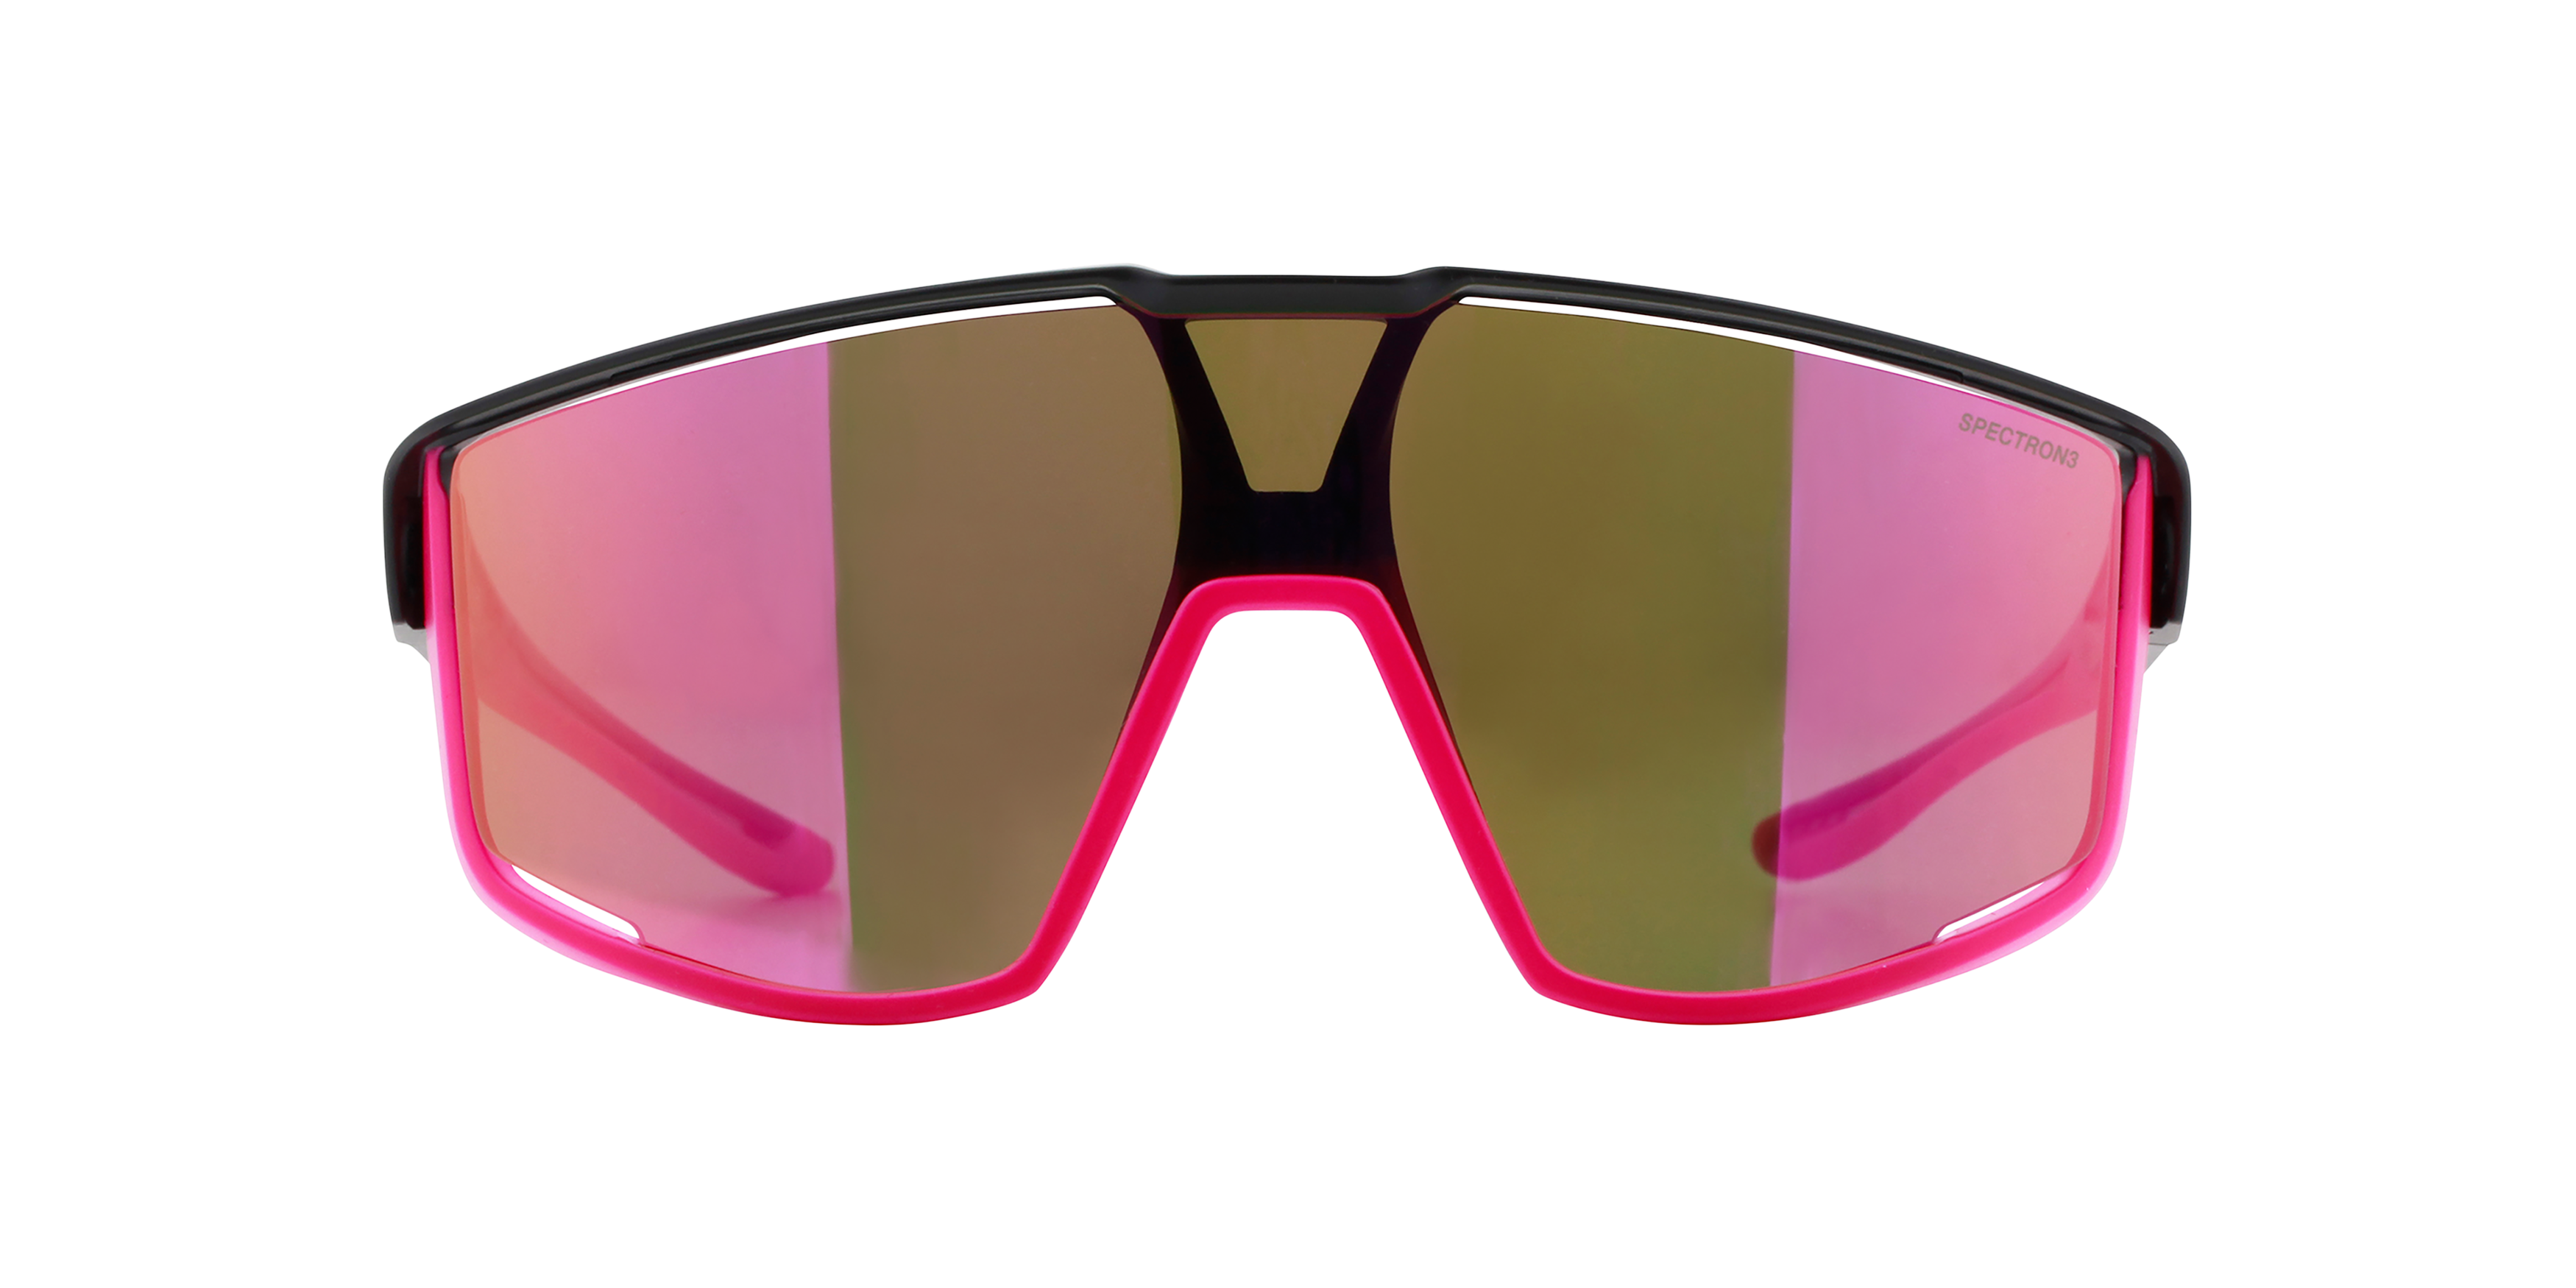 [products.image.front] Julbo FURY J531 1123